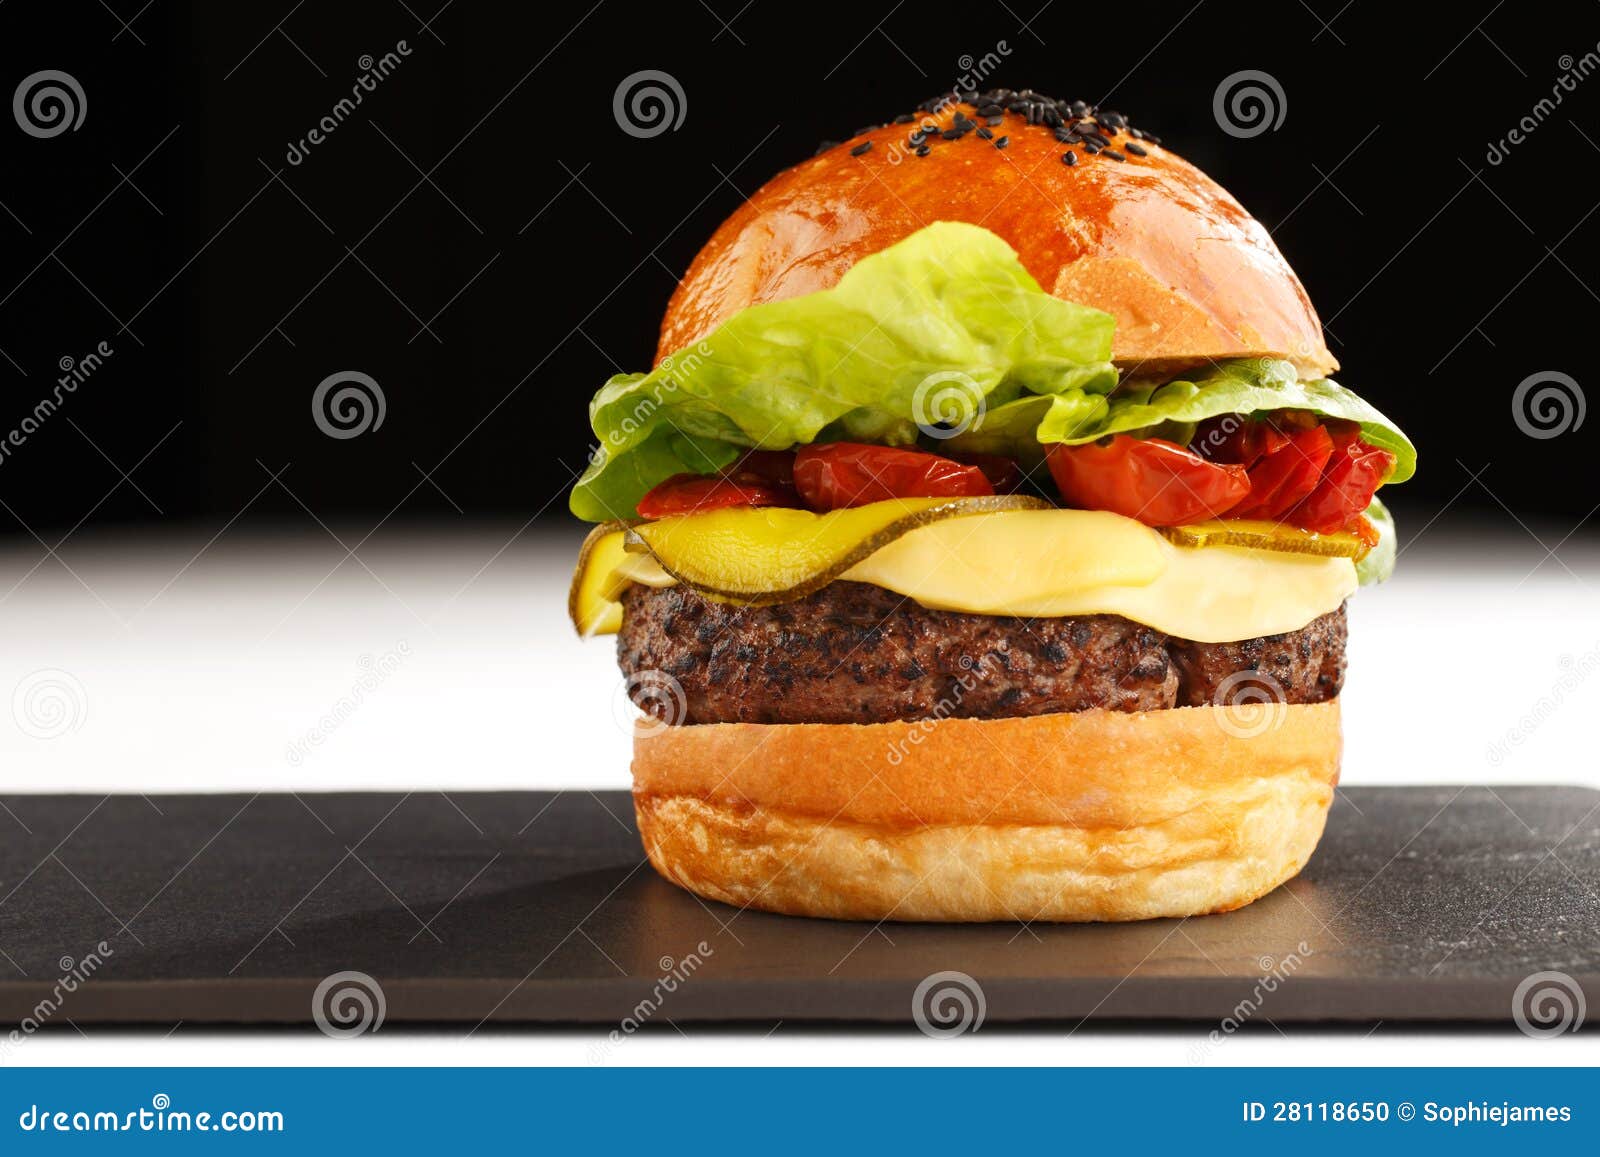 The Best Known Fast Food of America Stock Photo - Image of food, dinner ...